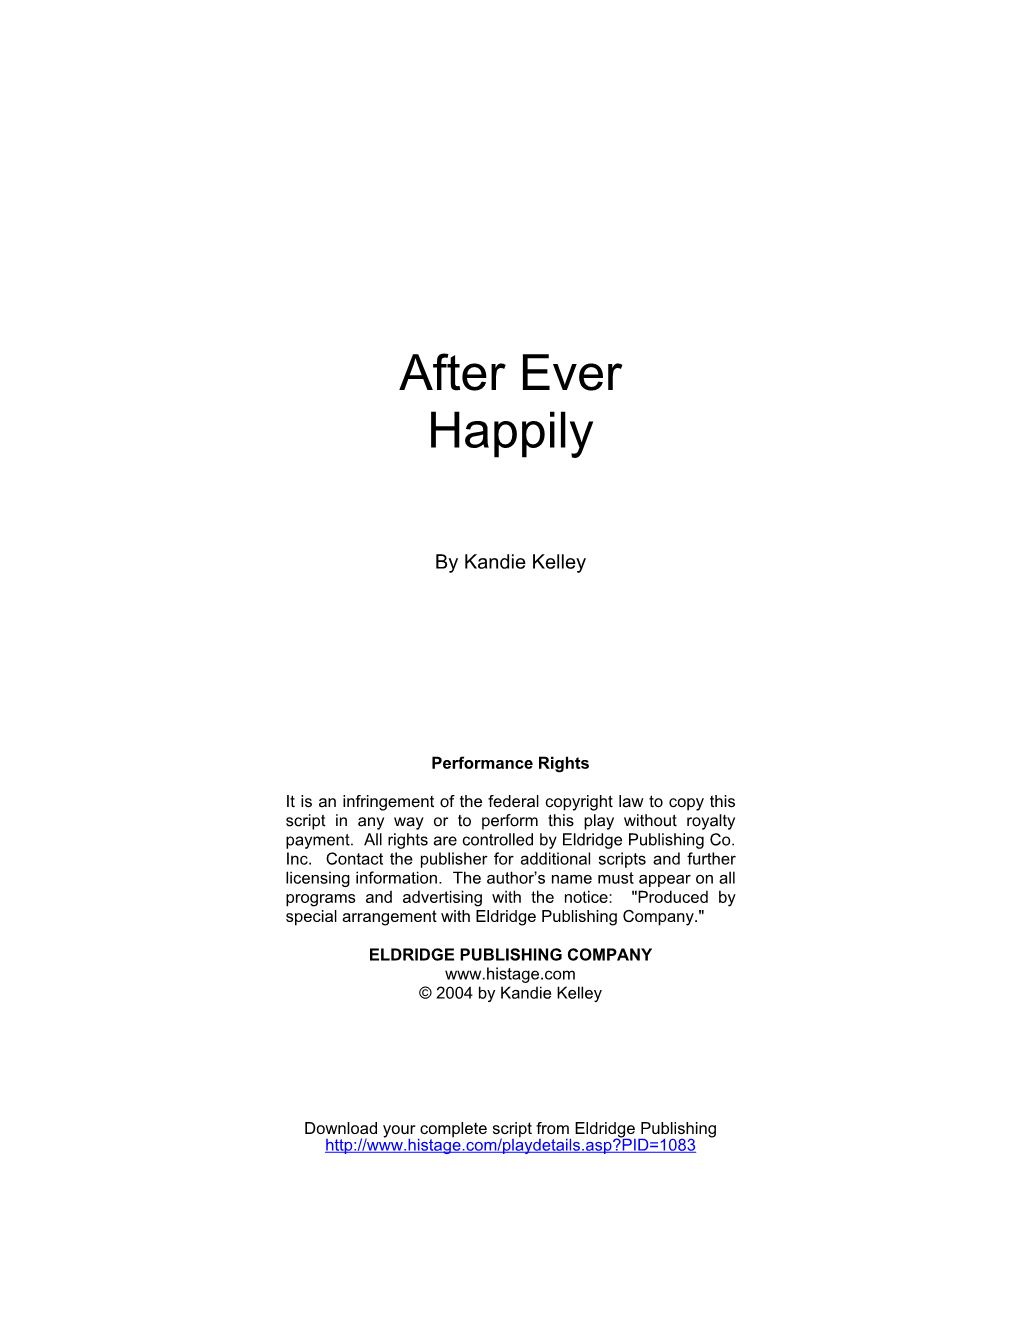 After Ever Happily